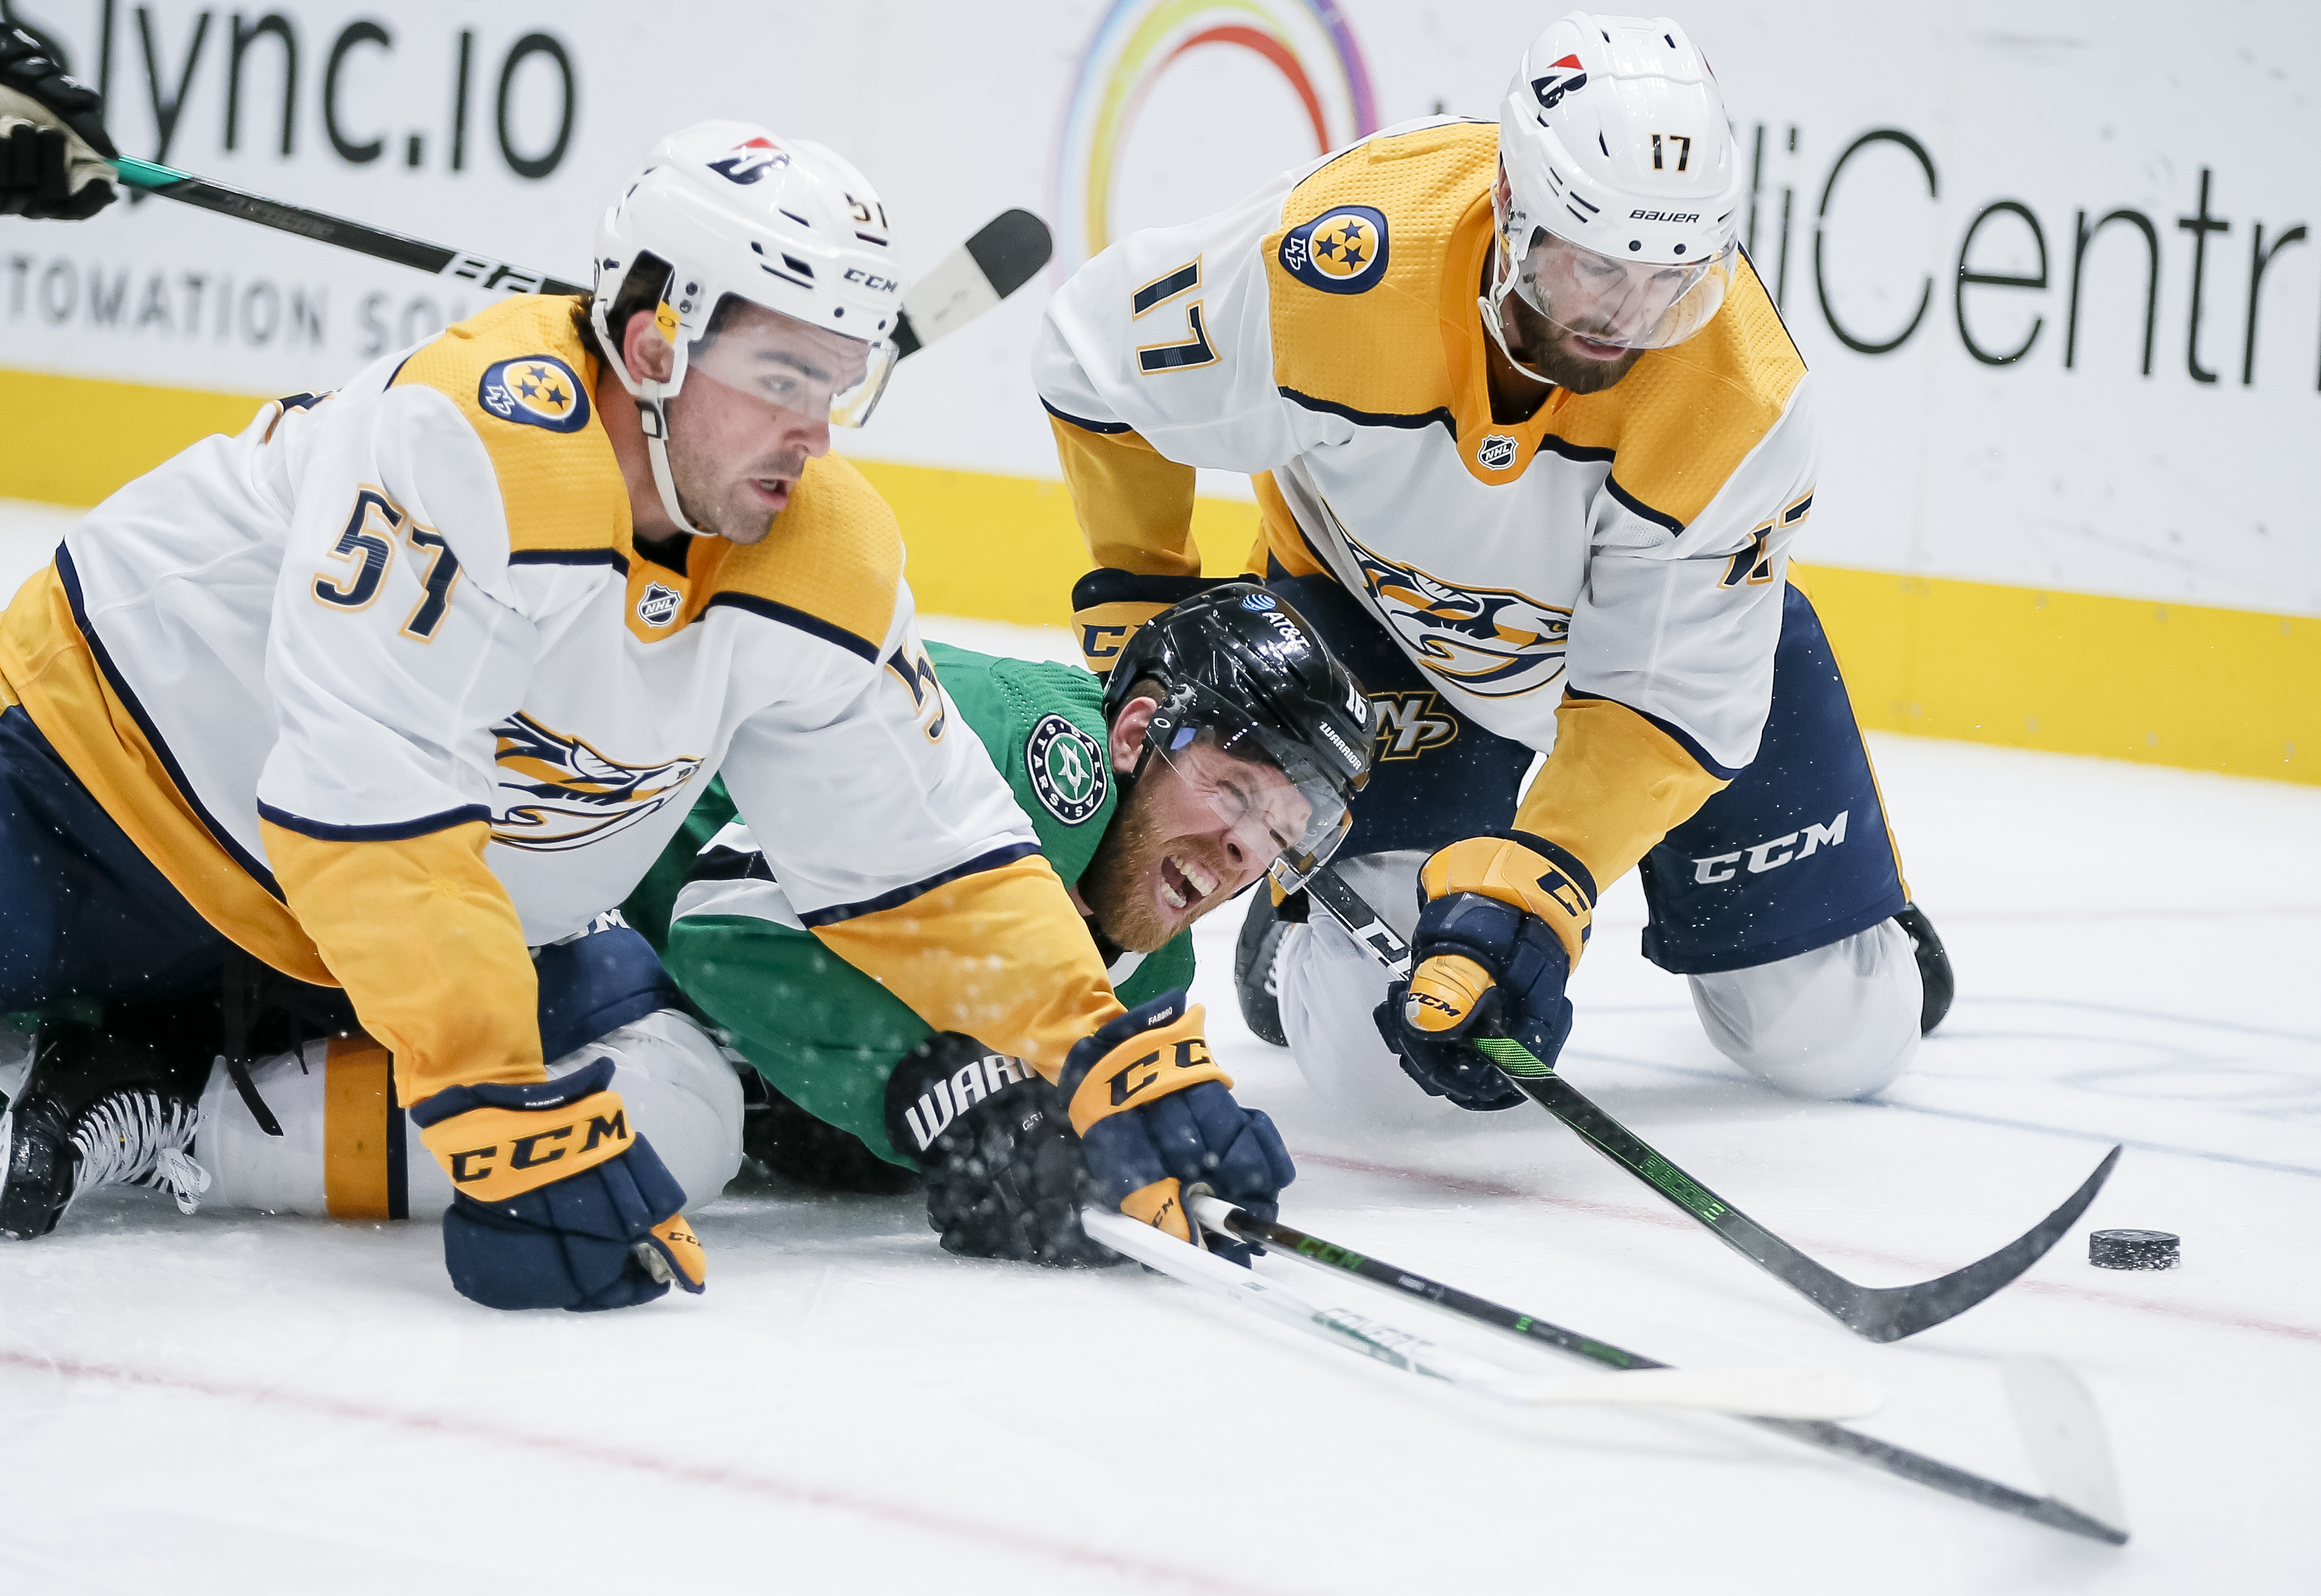 The Stars know it, the Predators know it — todays matchup is most important game of year for playoff hopes